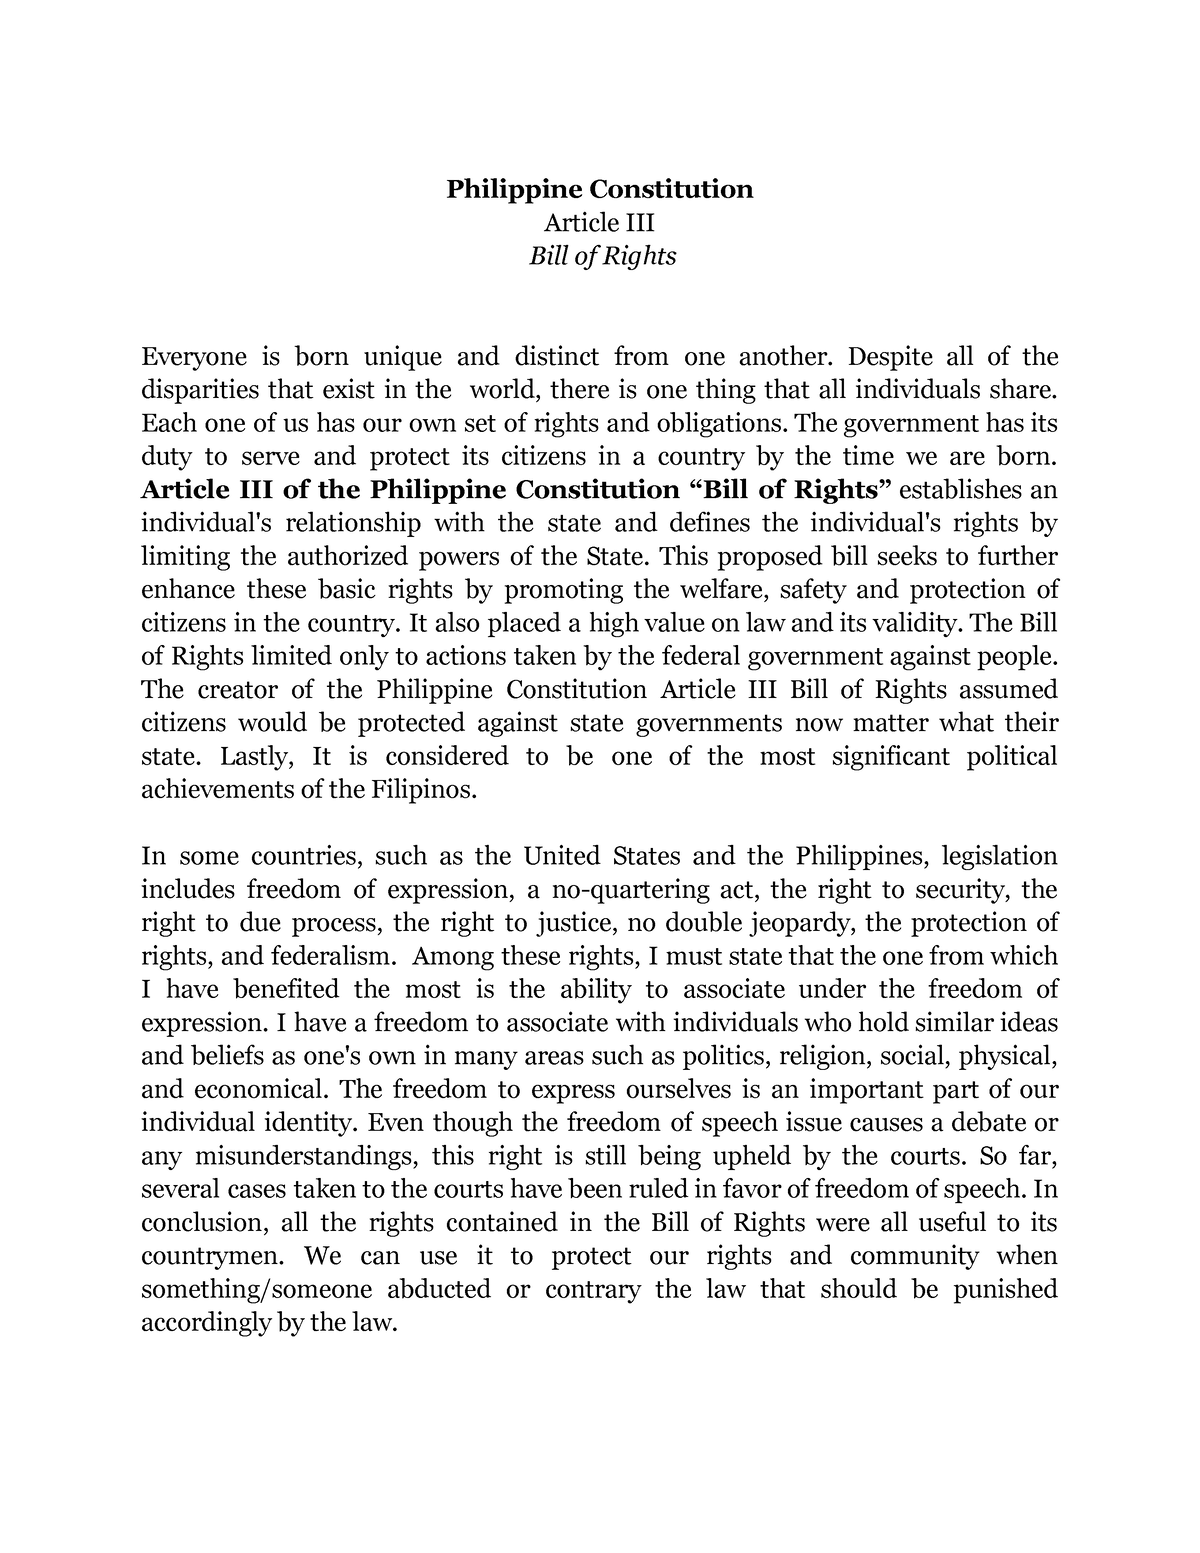 importance of constitution in the philippines essay